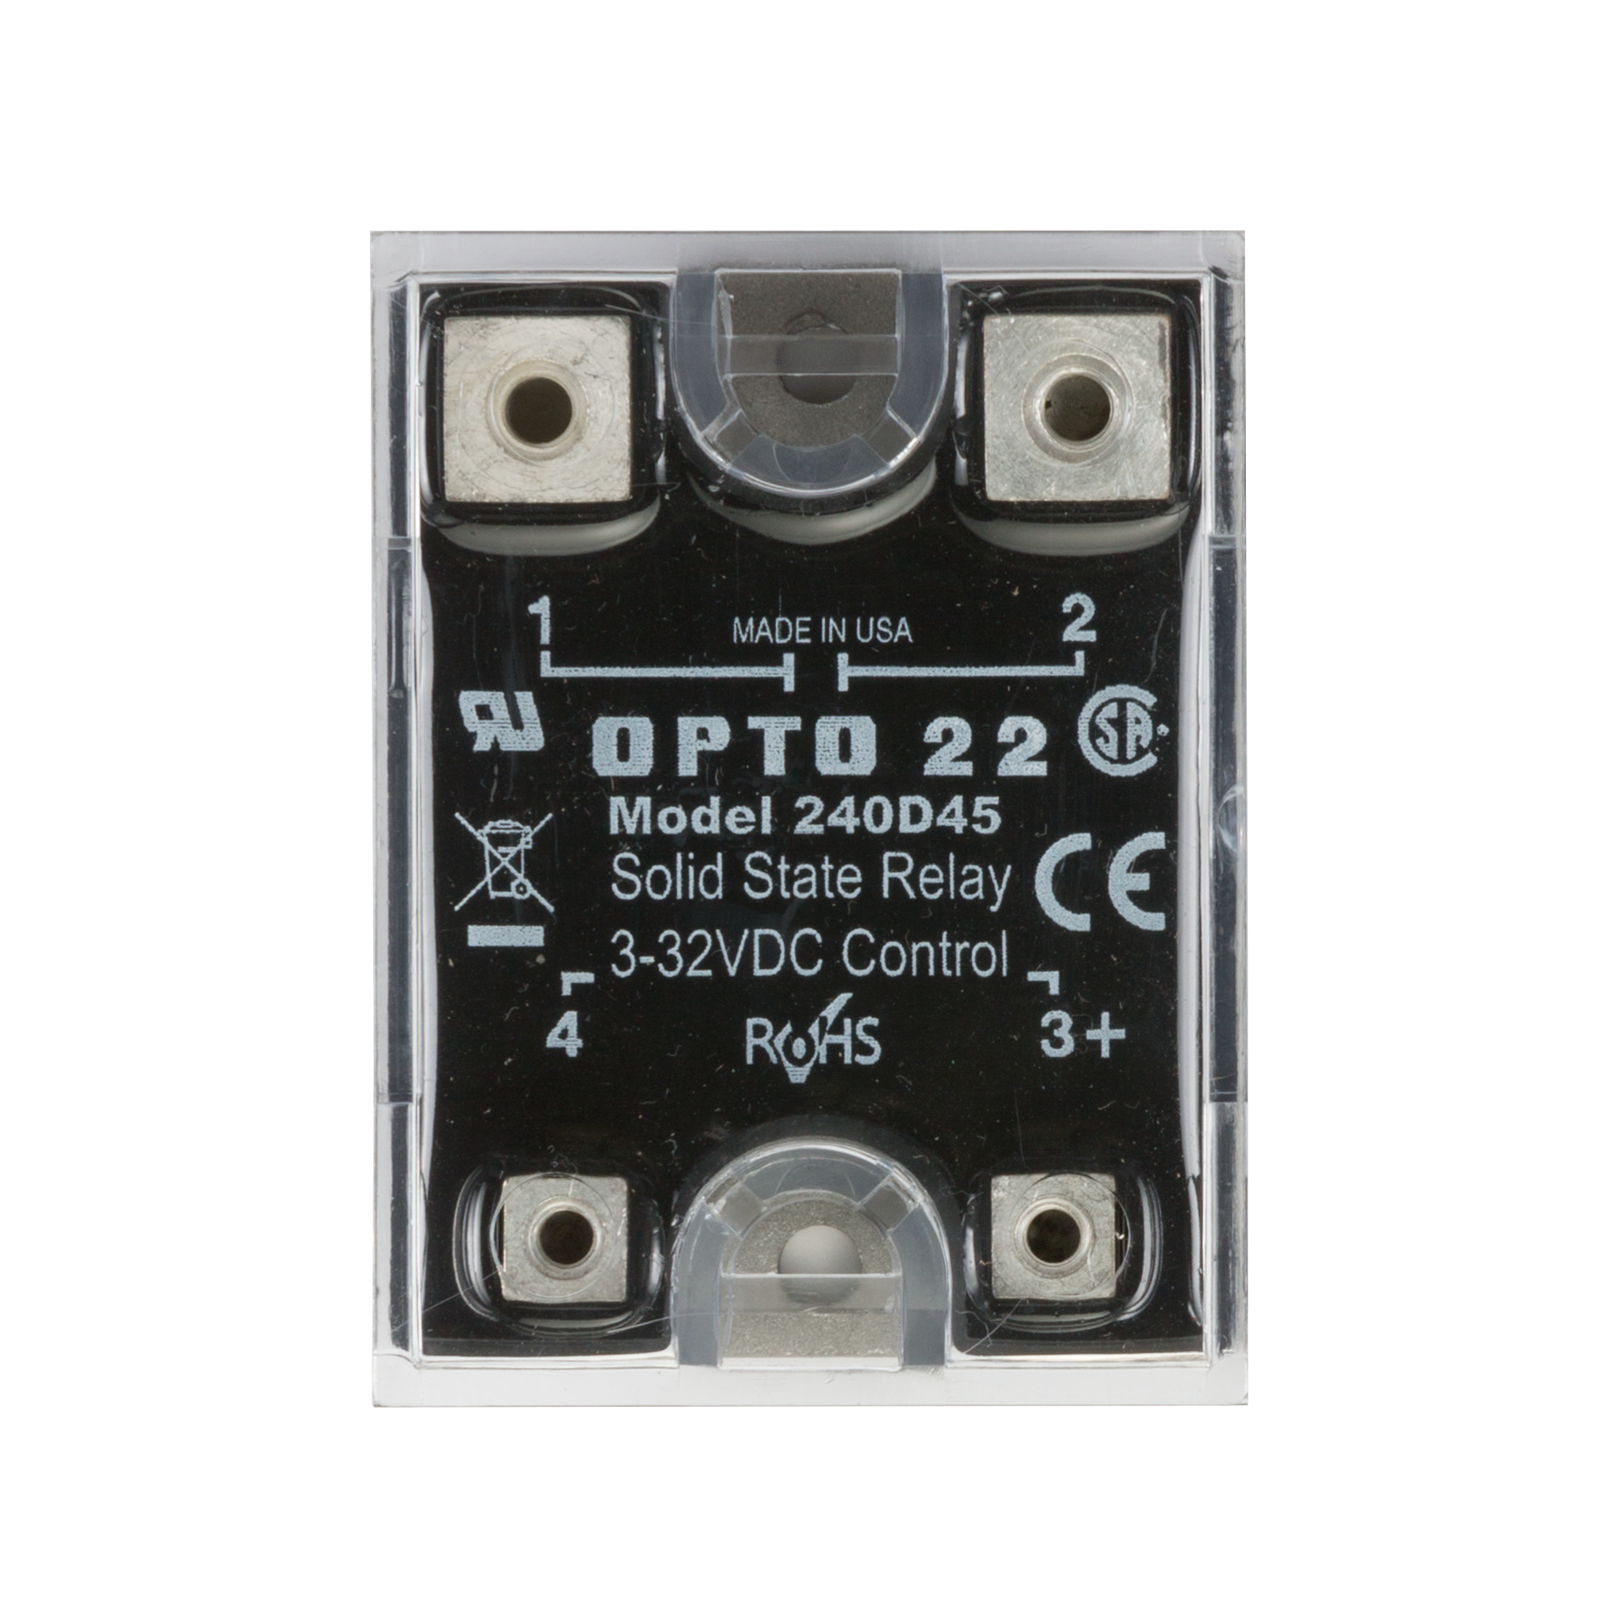 Opto 22 Solid State Relay Safety Cover DEL5 Power Series Model 